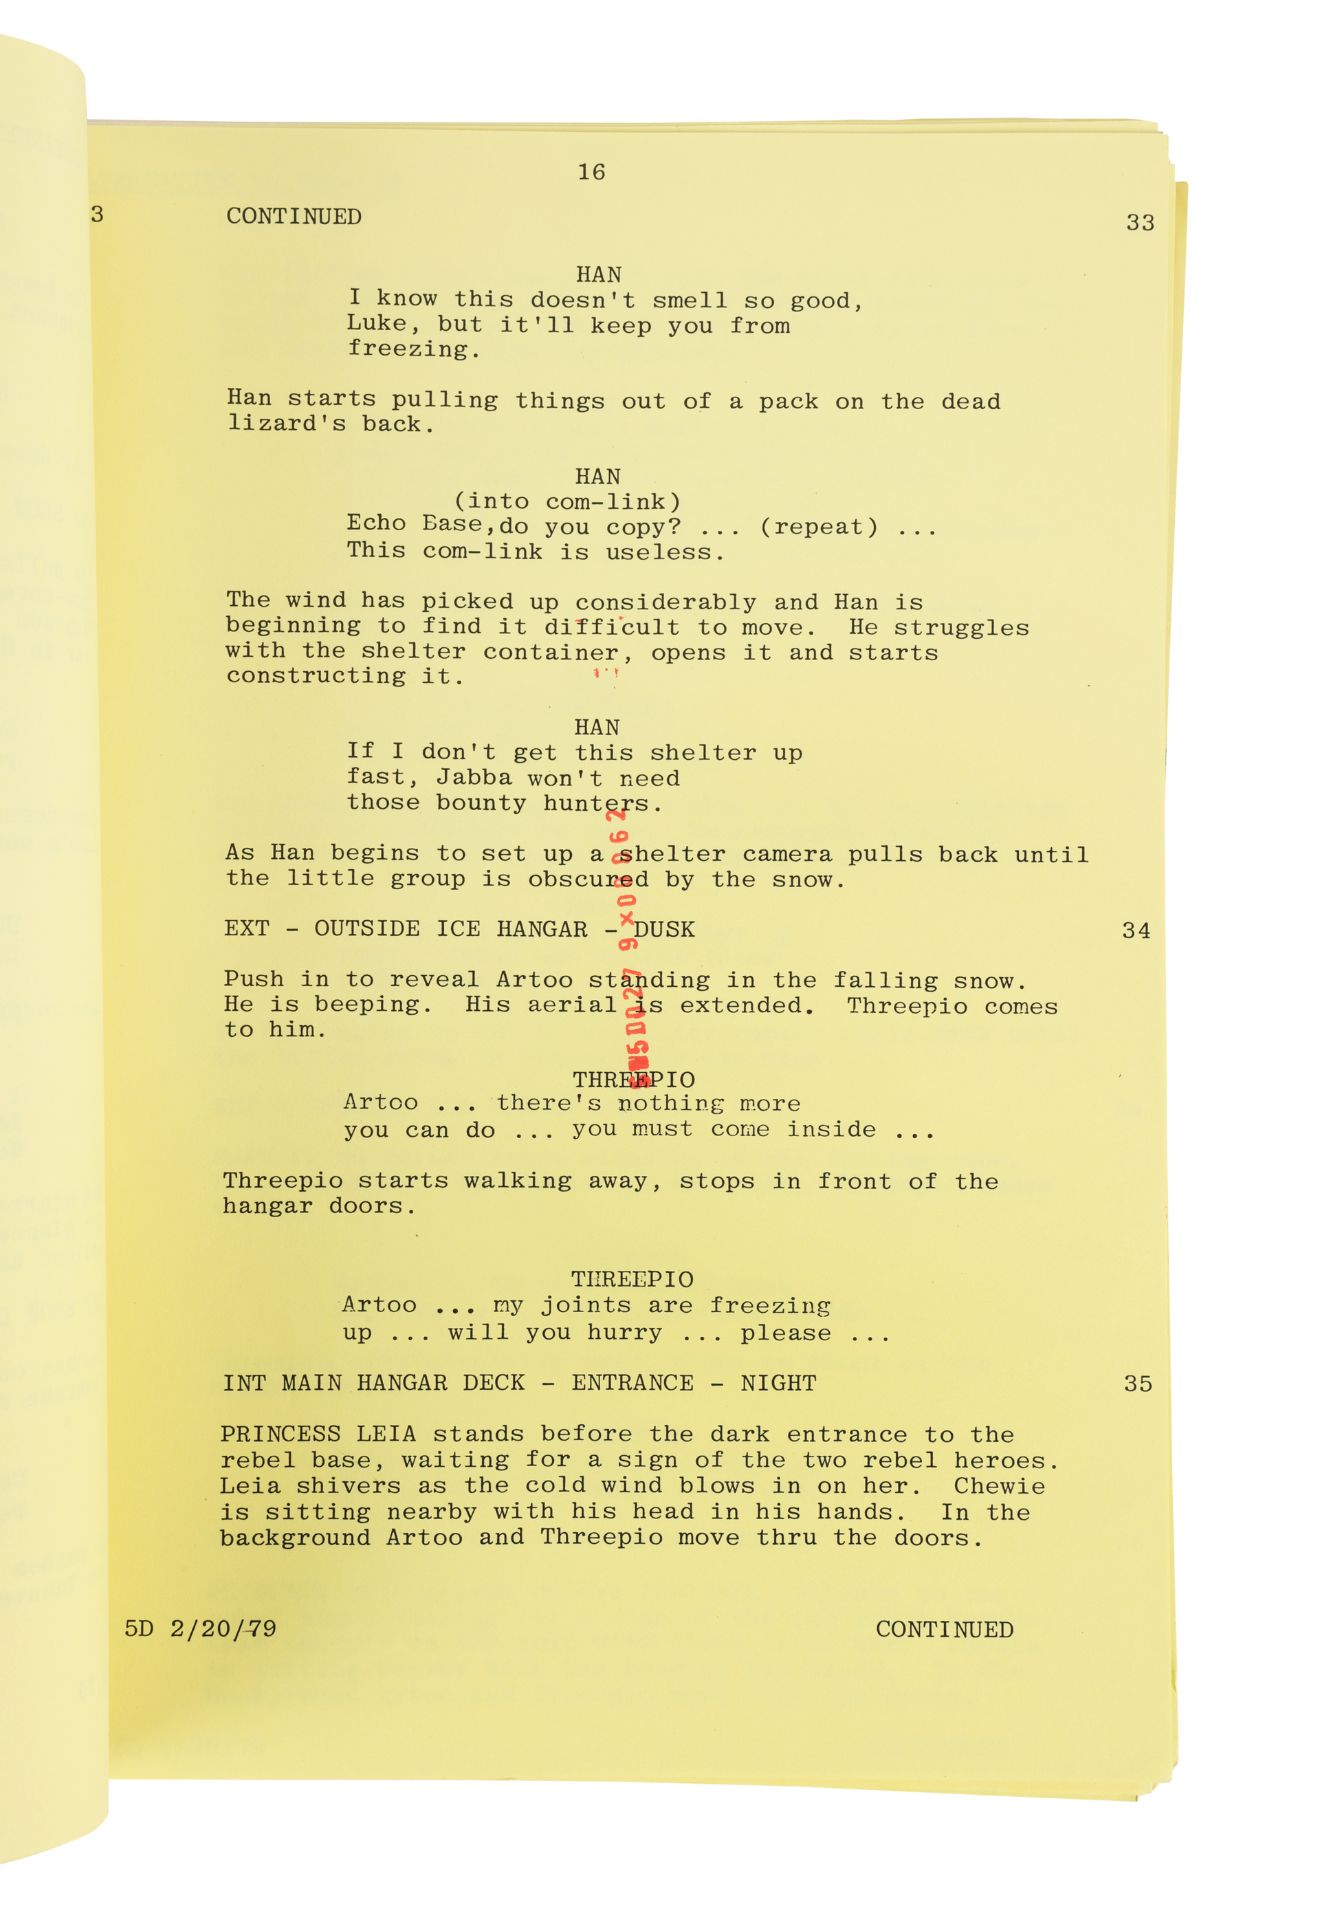 STAR WARS: THE EMPIRE STRIKES BACK (1980) - Anthony Daniels Collection: Hand-annotated Partial Scrip - Image 5 of 12